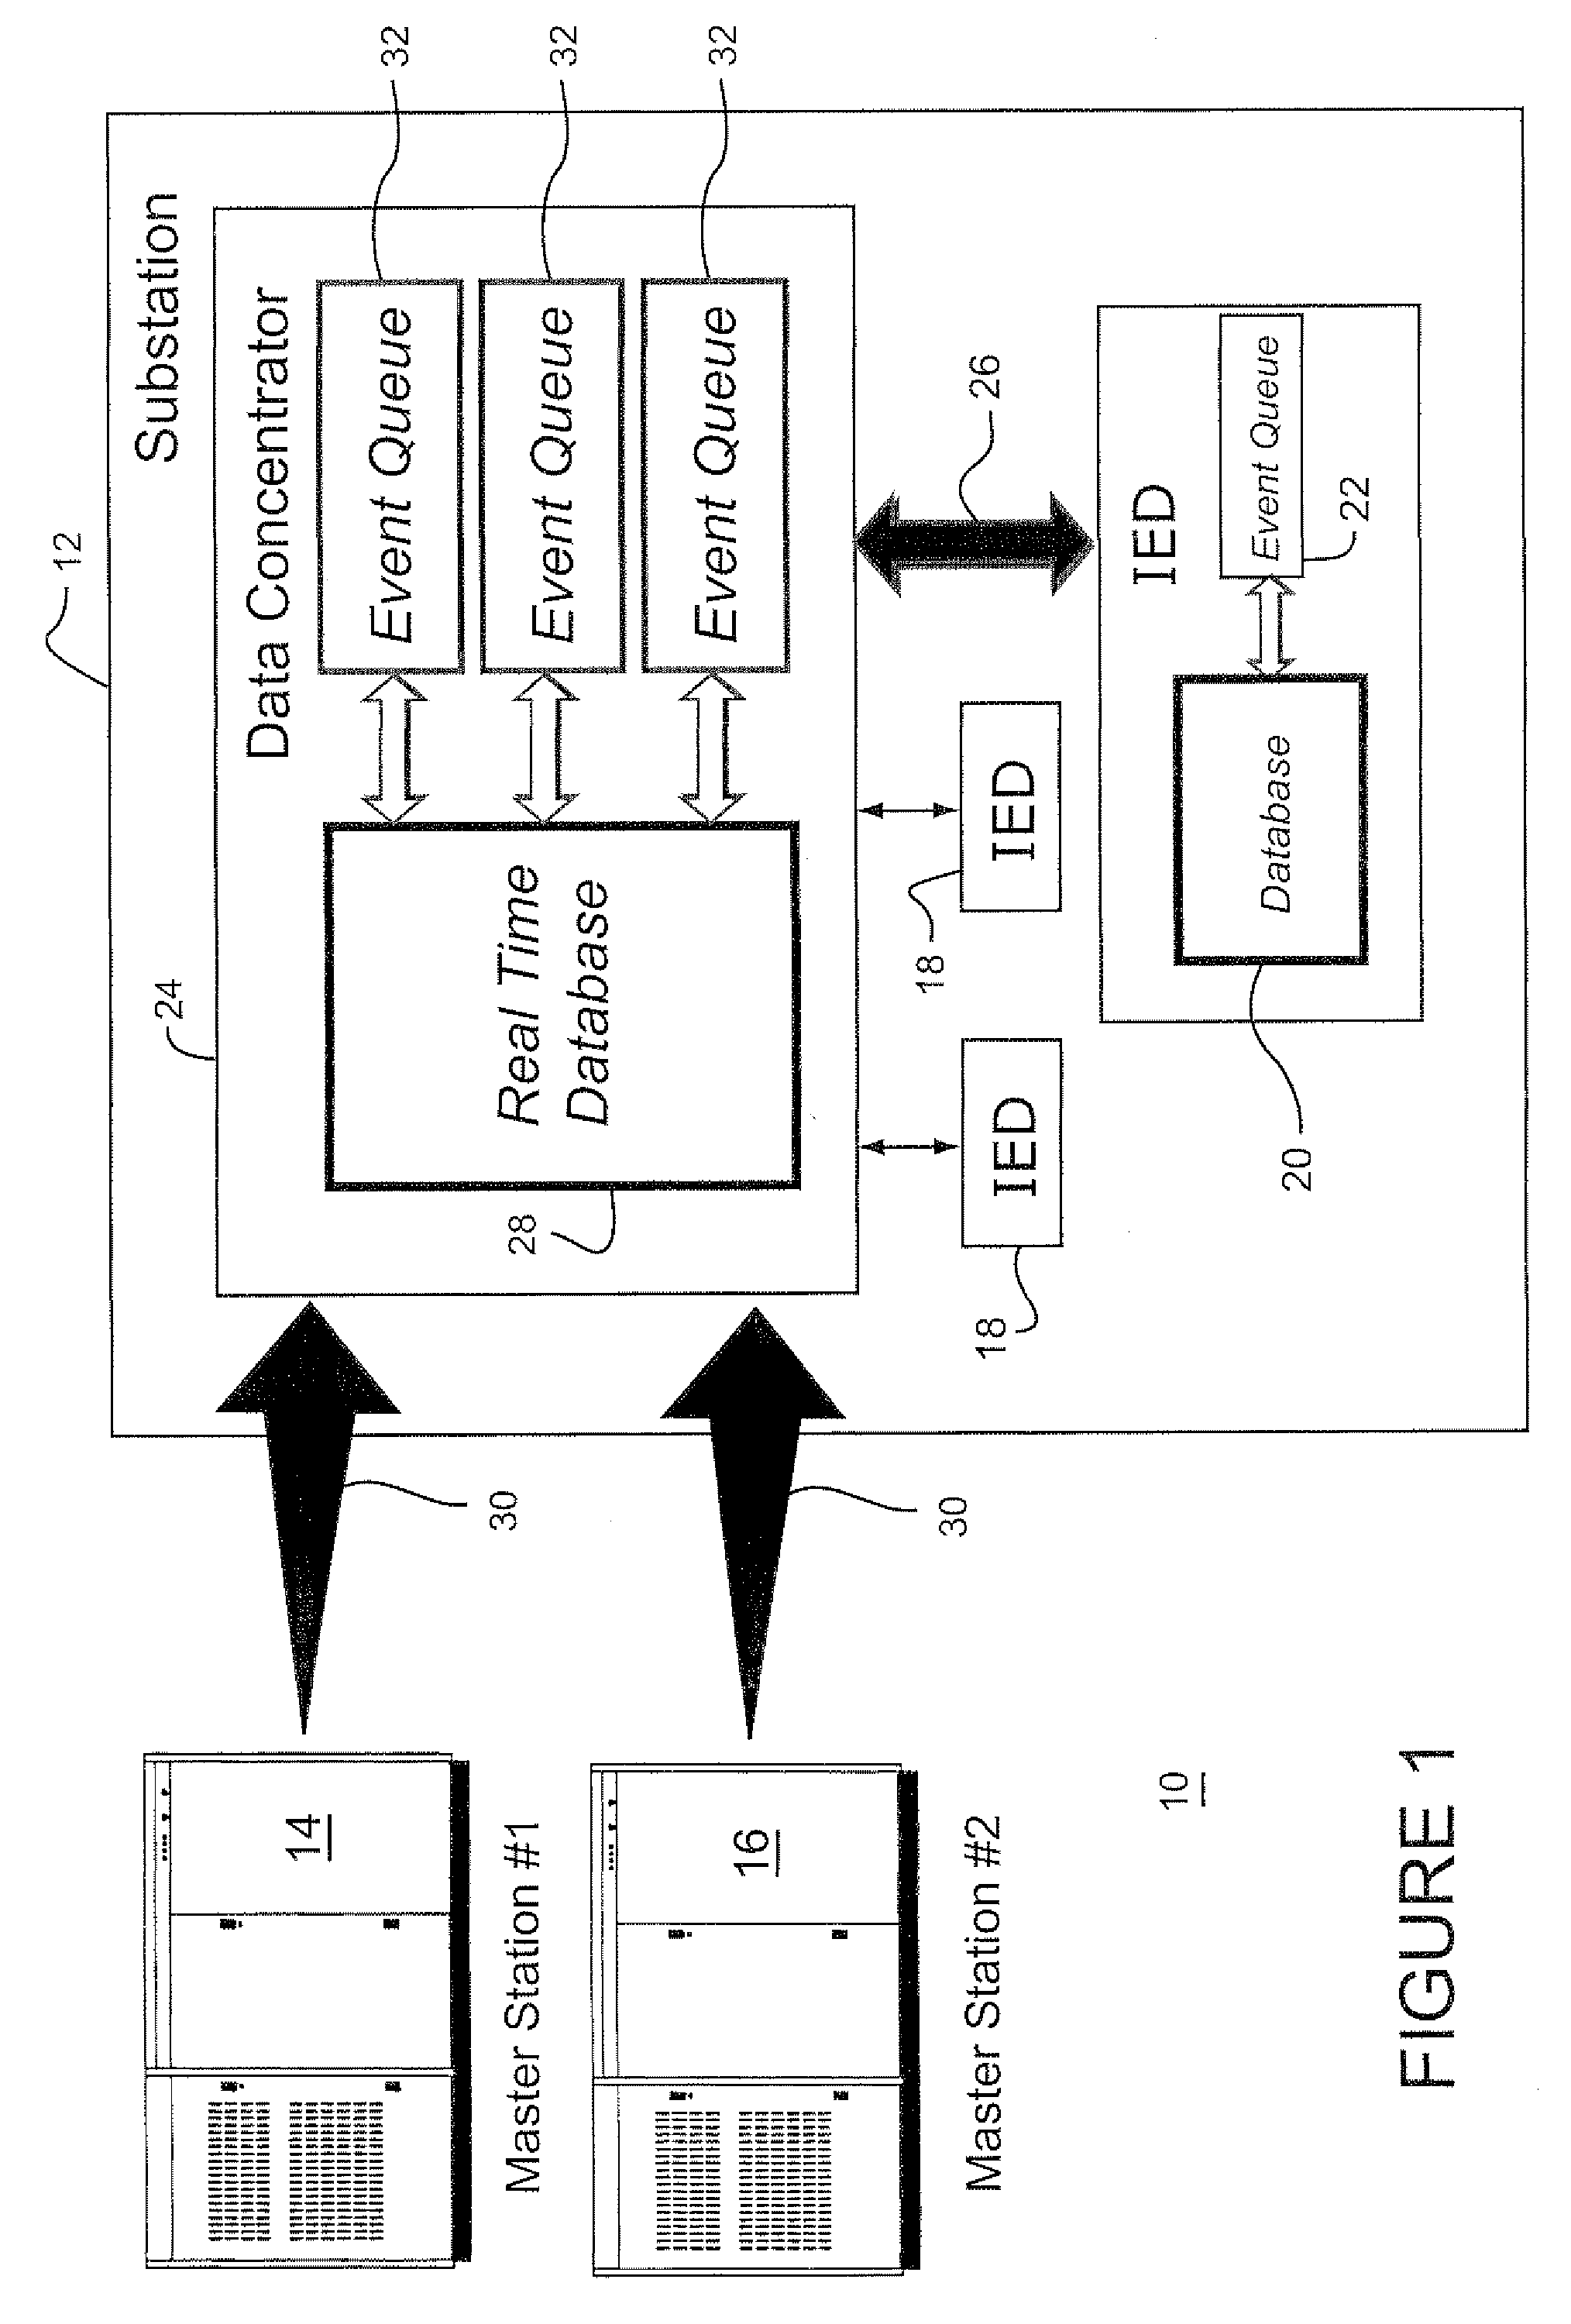 Method and system for collecting data from intelligent electronic devices in an electrical power substation